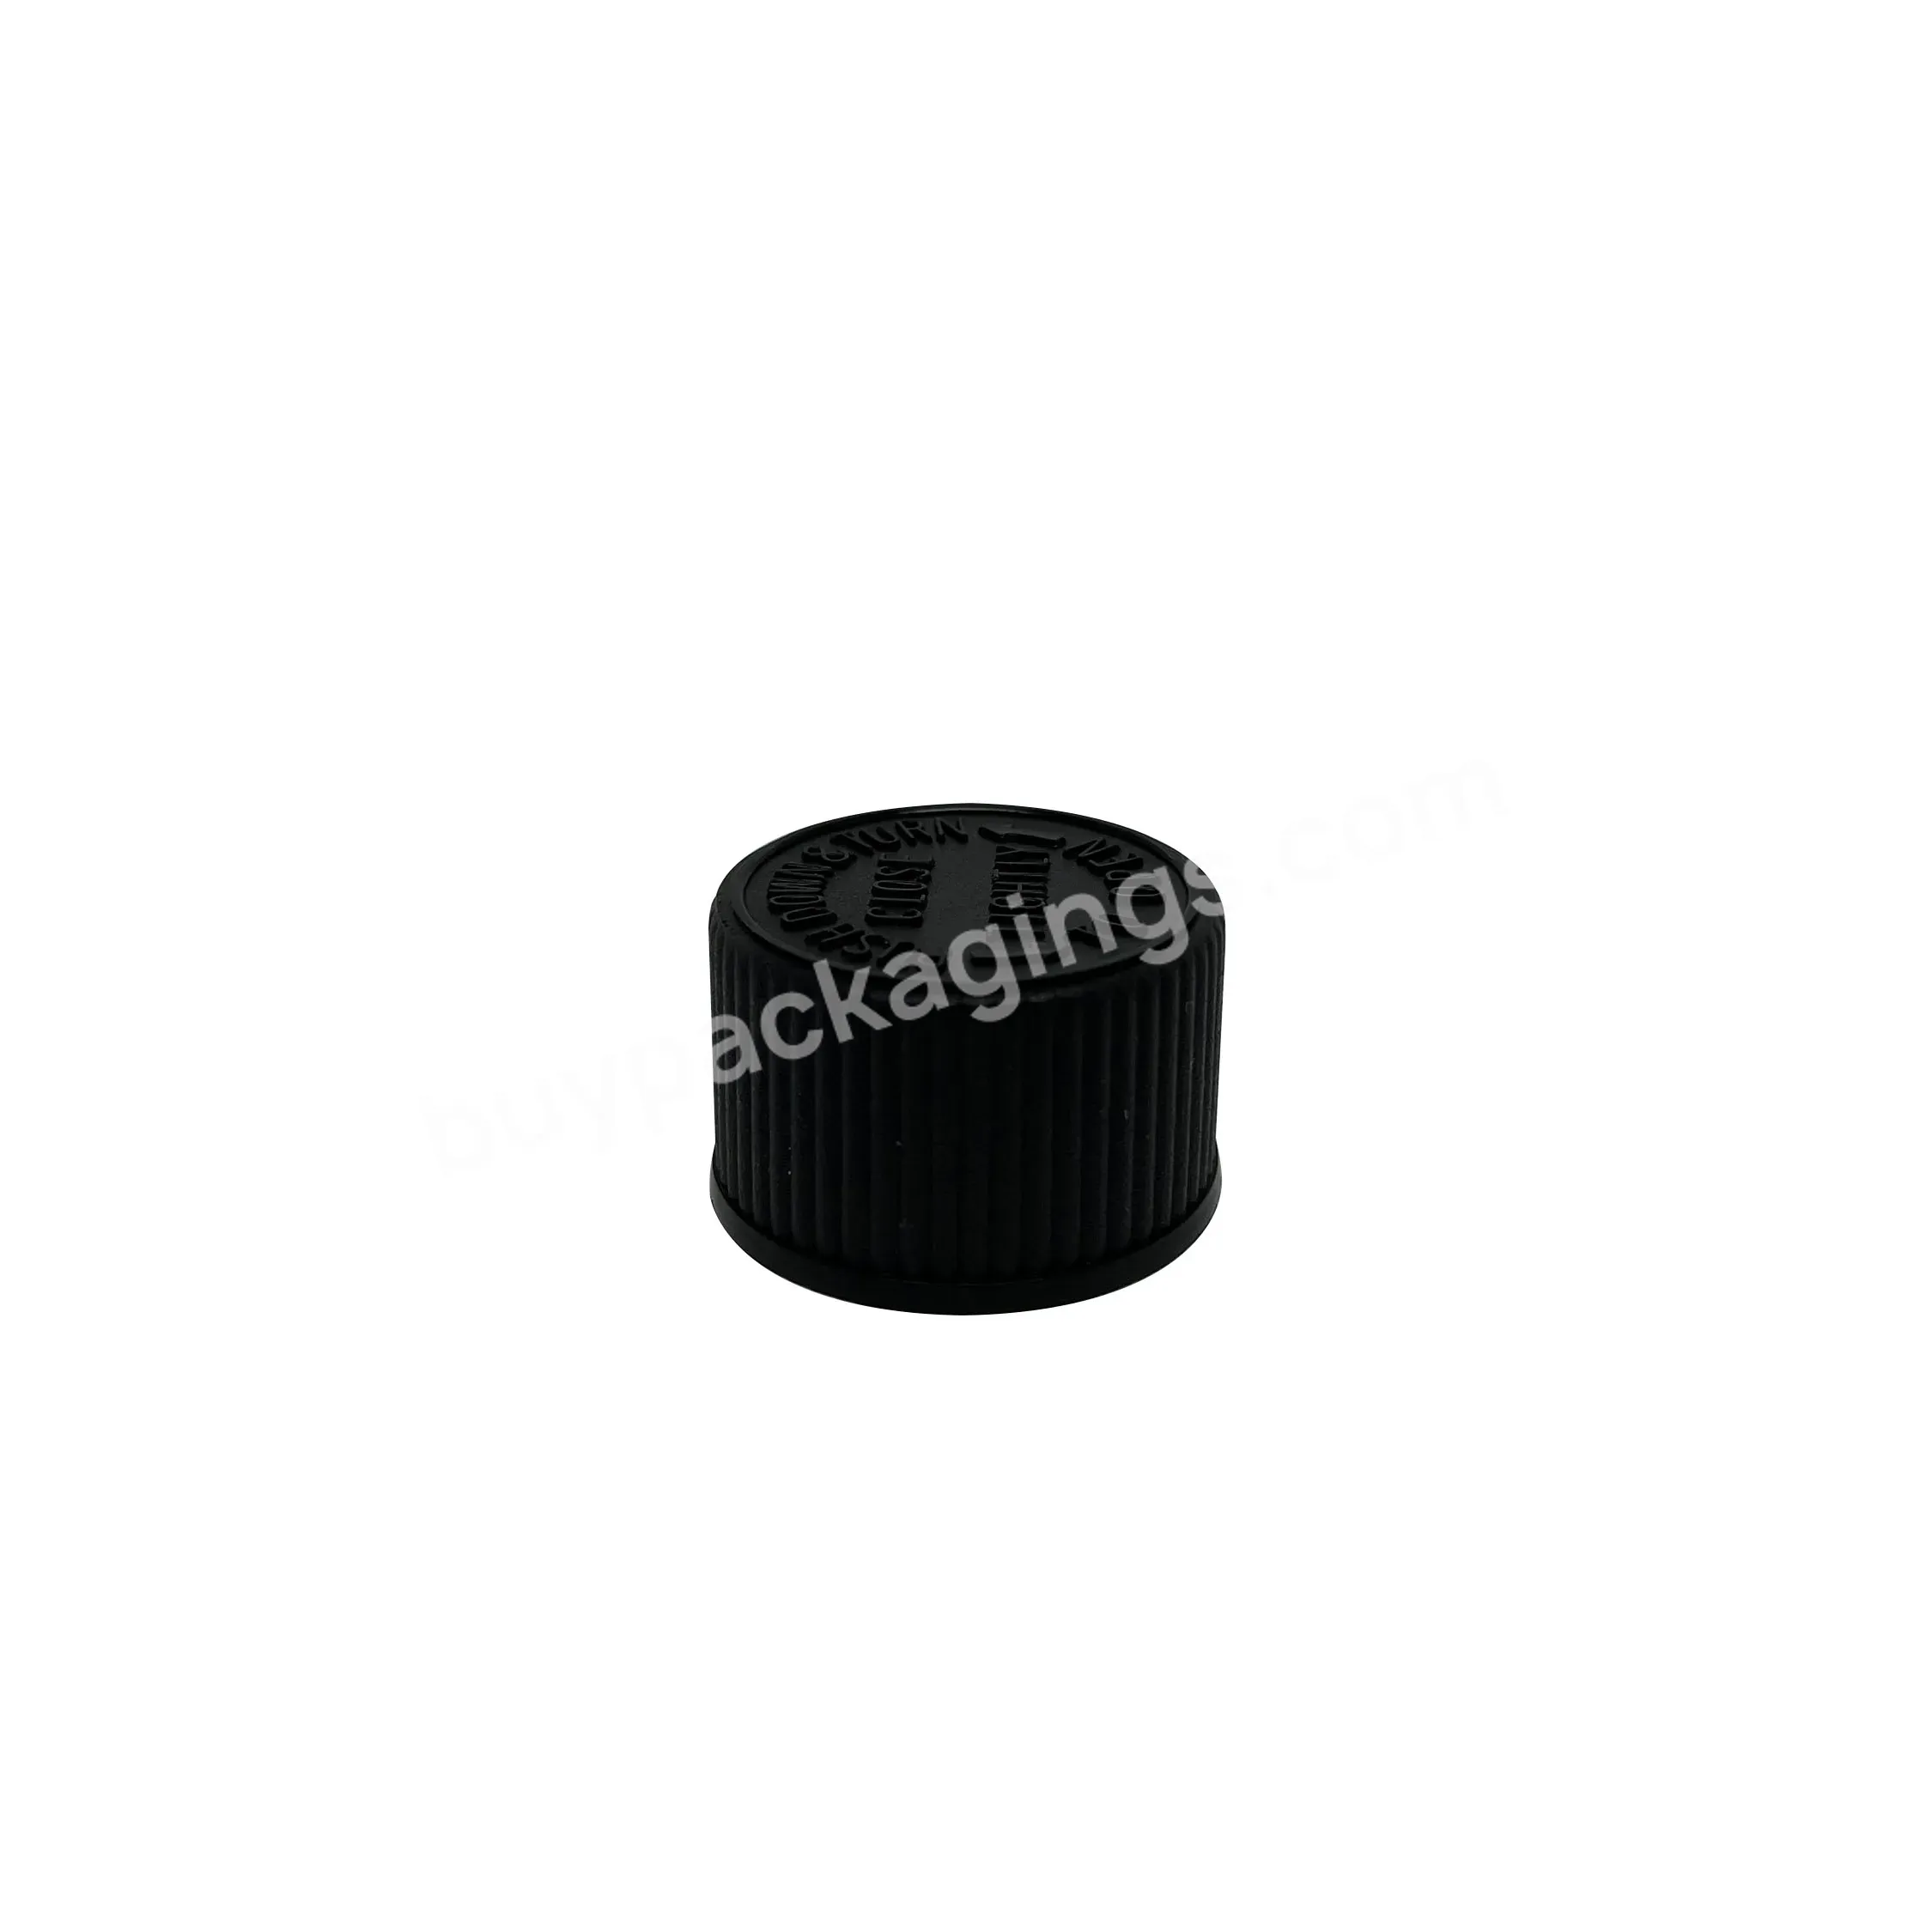 20/24/28mm Wholesale Plastic Children's Anti-theft Lid Health Products Safety Lid Medicine Supplies Pressure Screw Cap - Buy 20/24/28mm Wholesale Plastic Children's Anti-theft Lid,Health Products Safety Lid,Medicine Supplies Pressure Screw Cap.